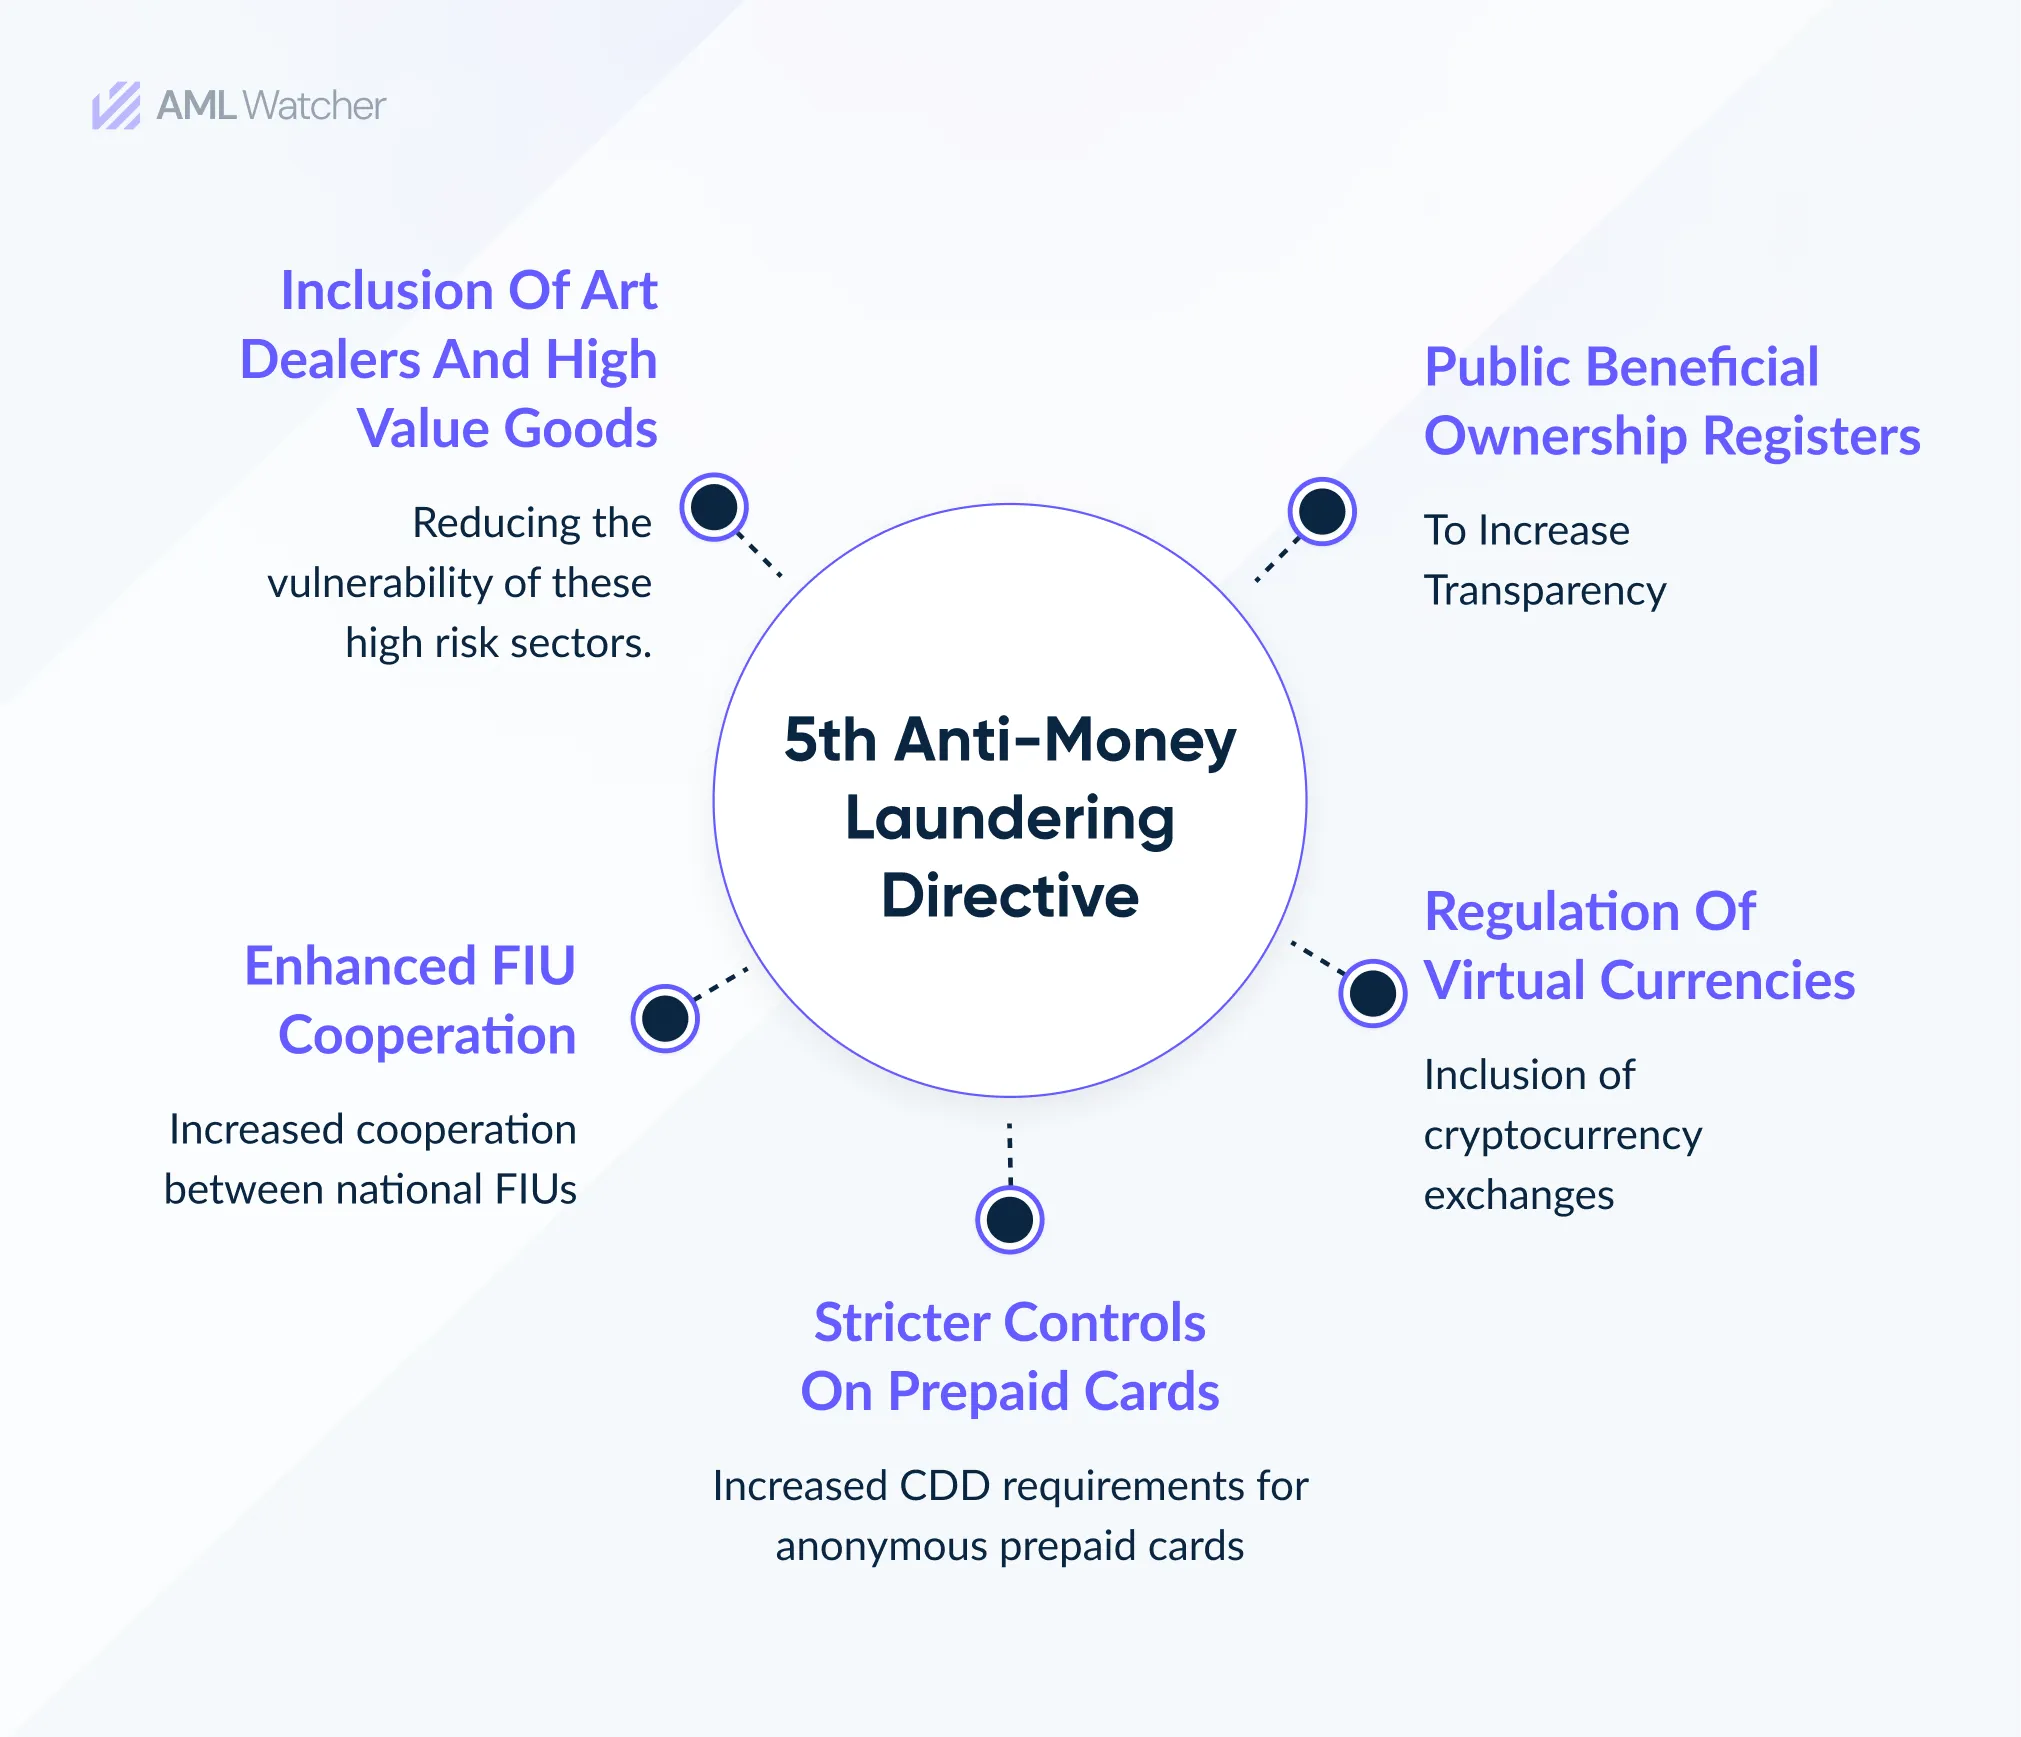 the image shows Key Features of 5th AML Directive